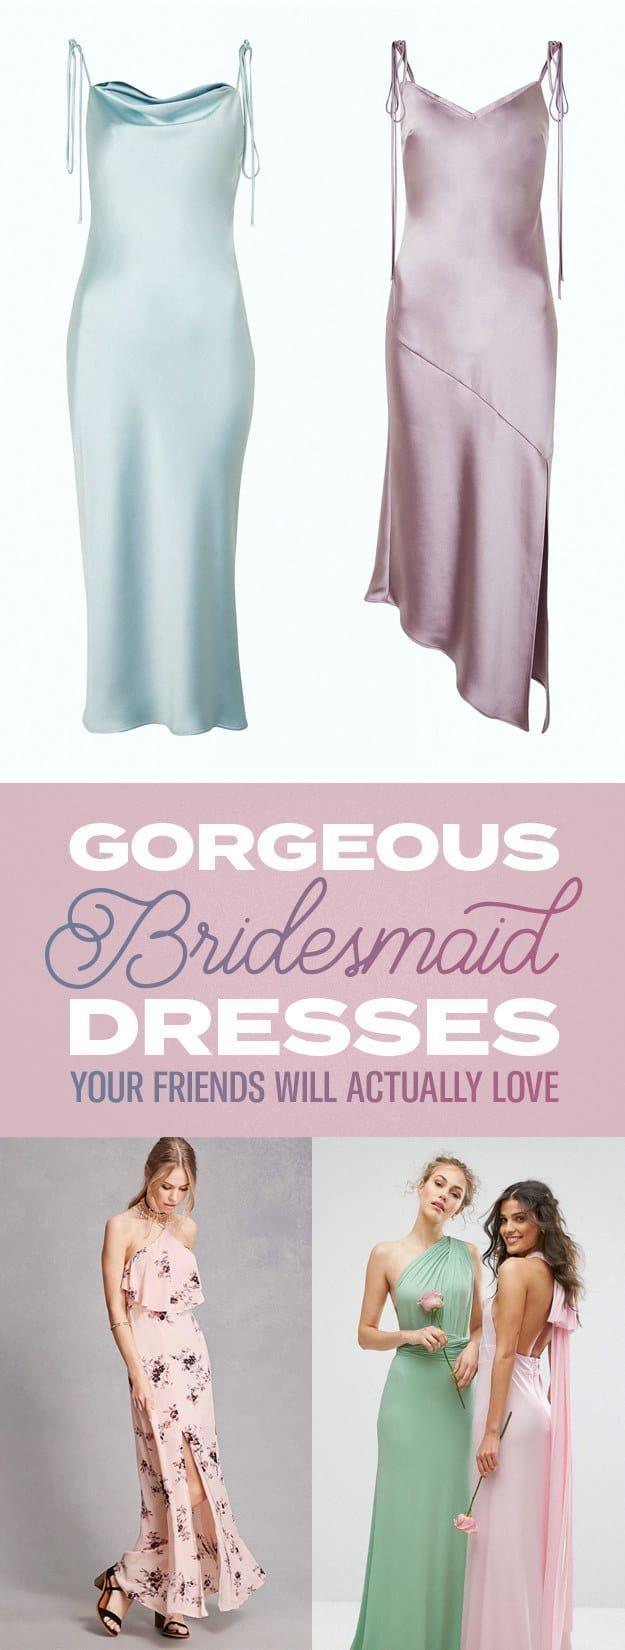 Свадьба - 33 Gorgeous Bridesmaid Dresses Your Friends Will Actually Love